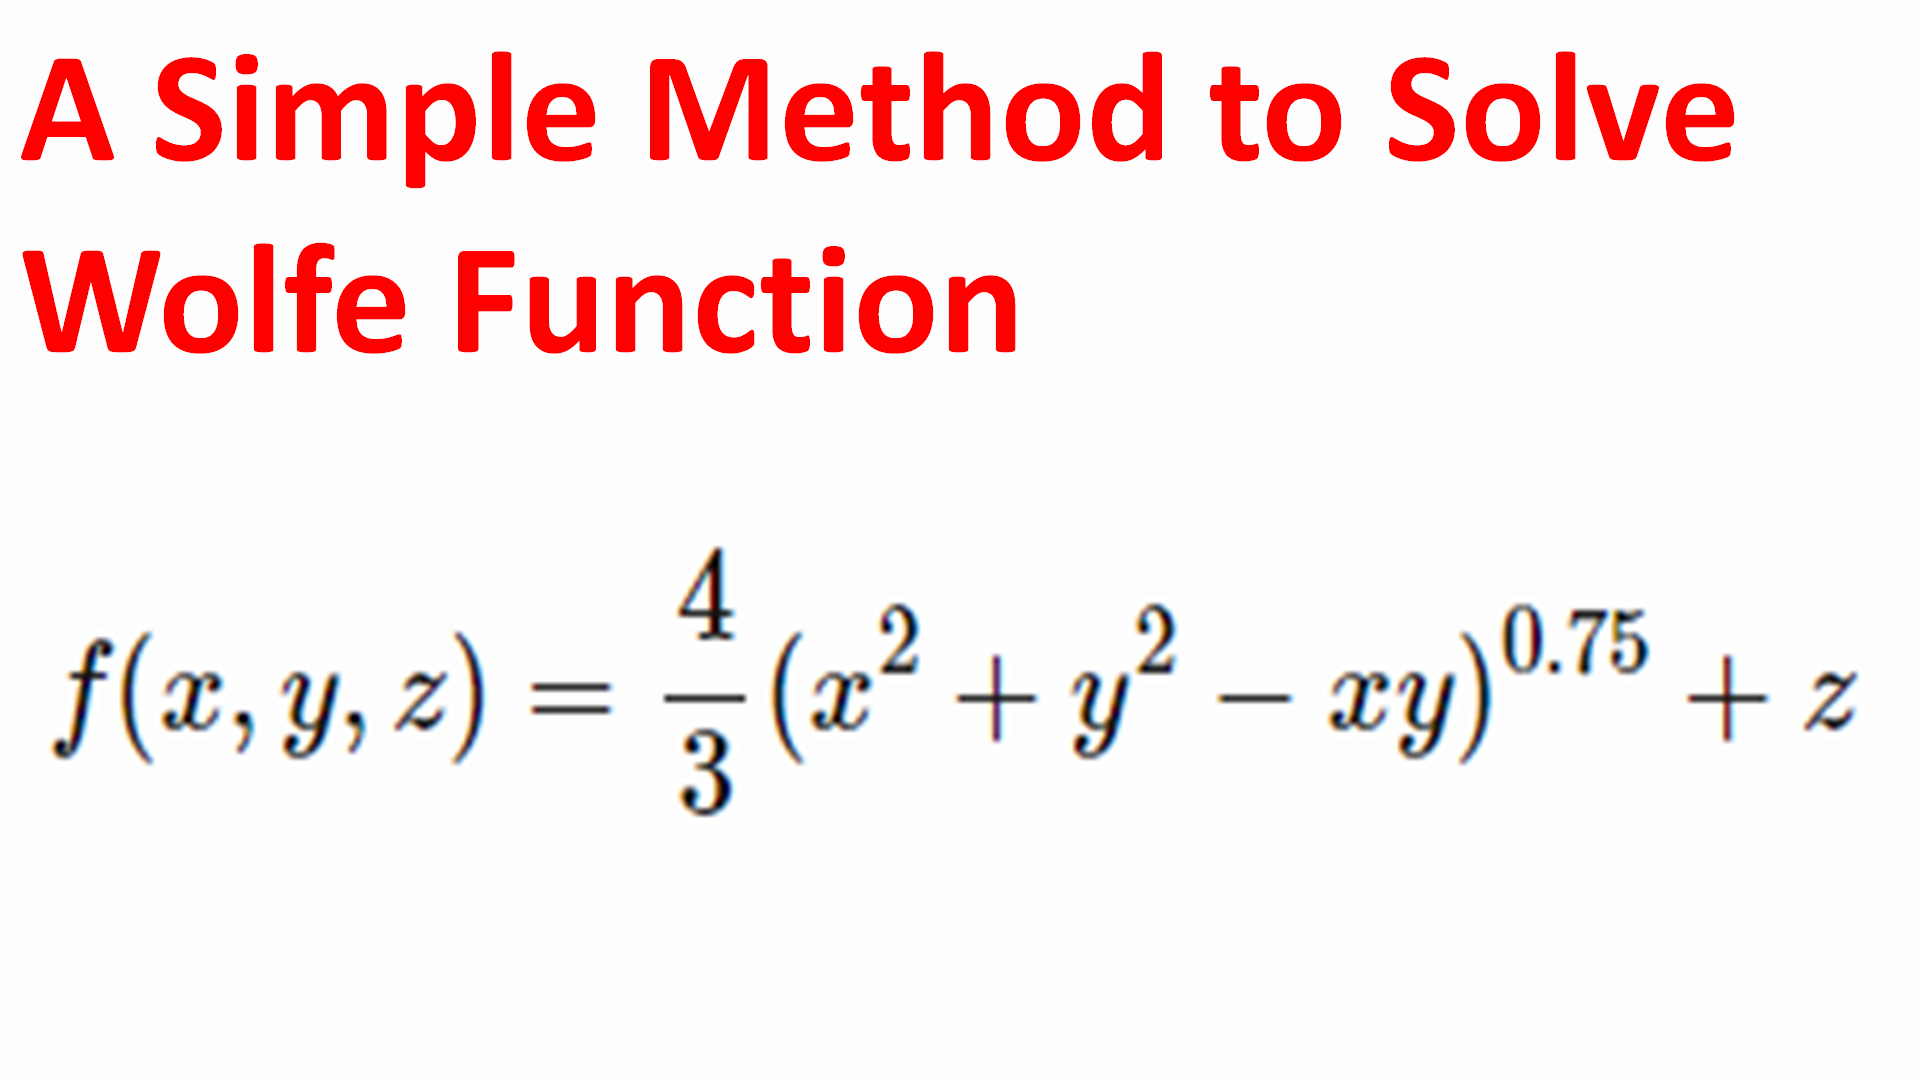 A Simple Method to Solve Wolfe Function